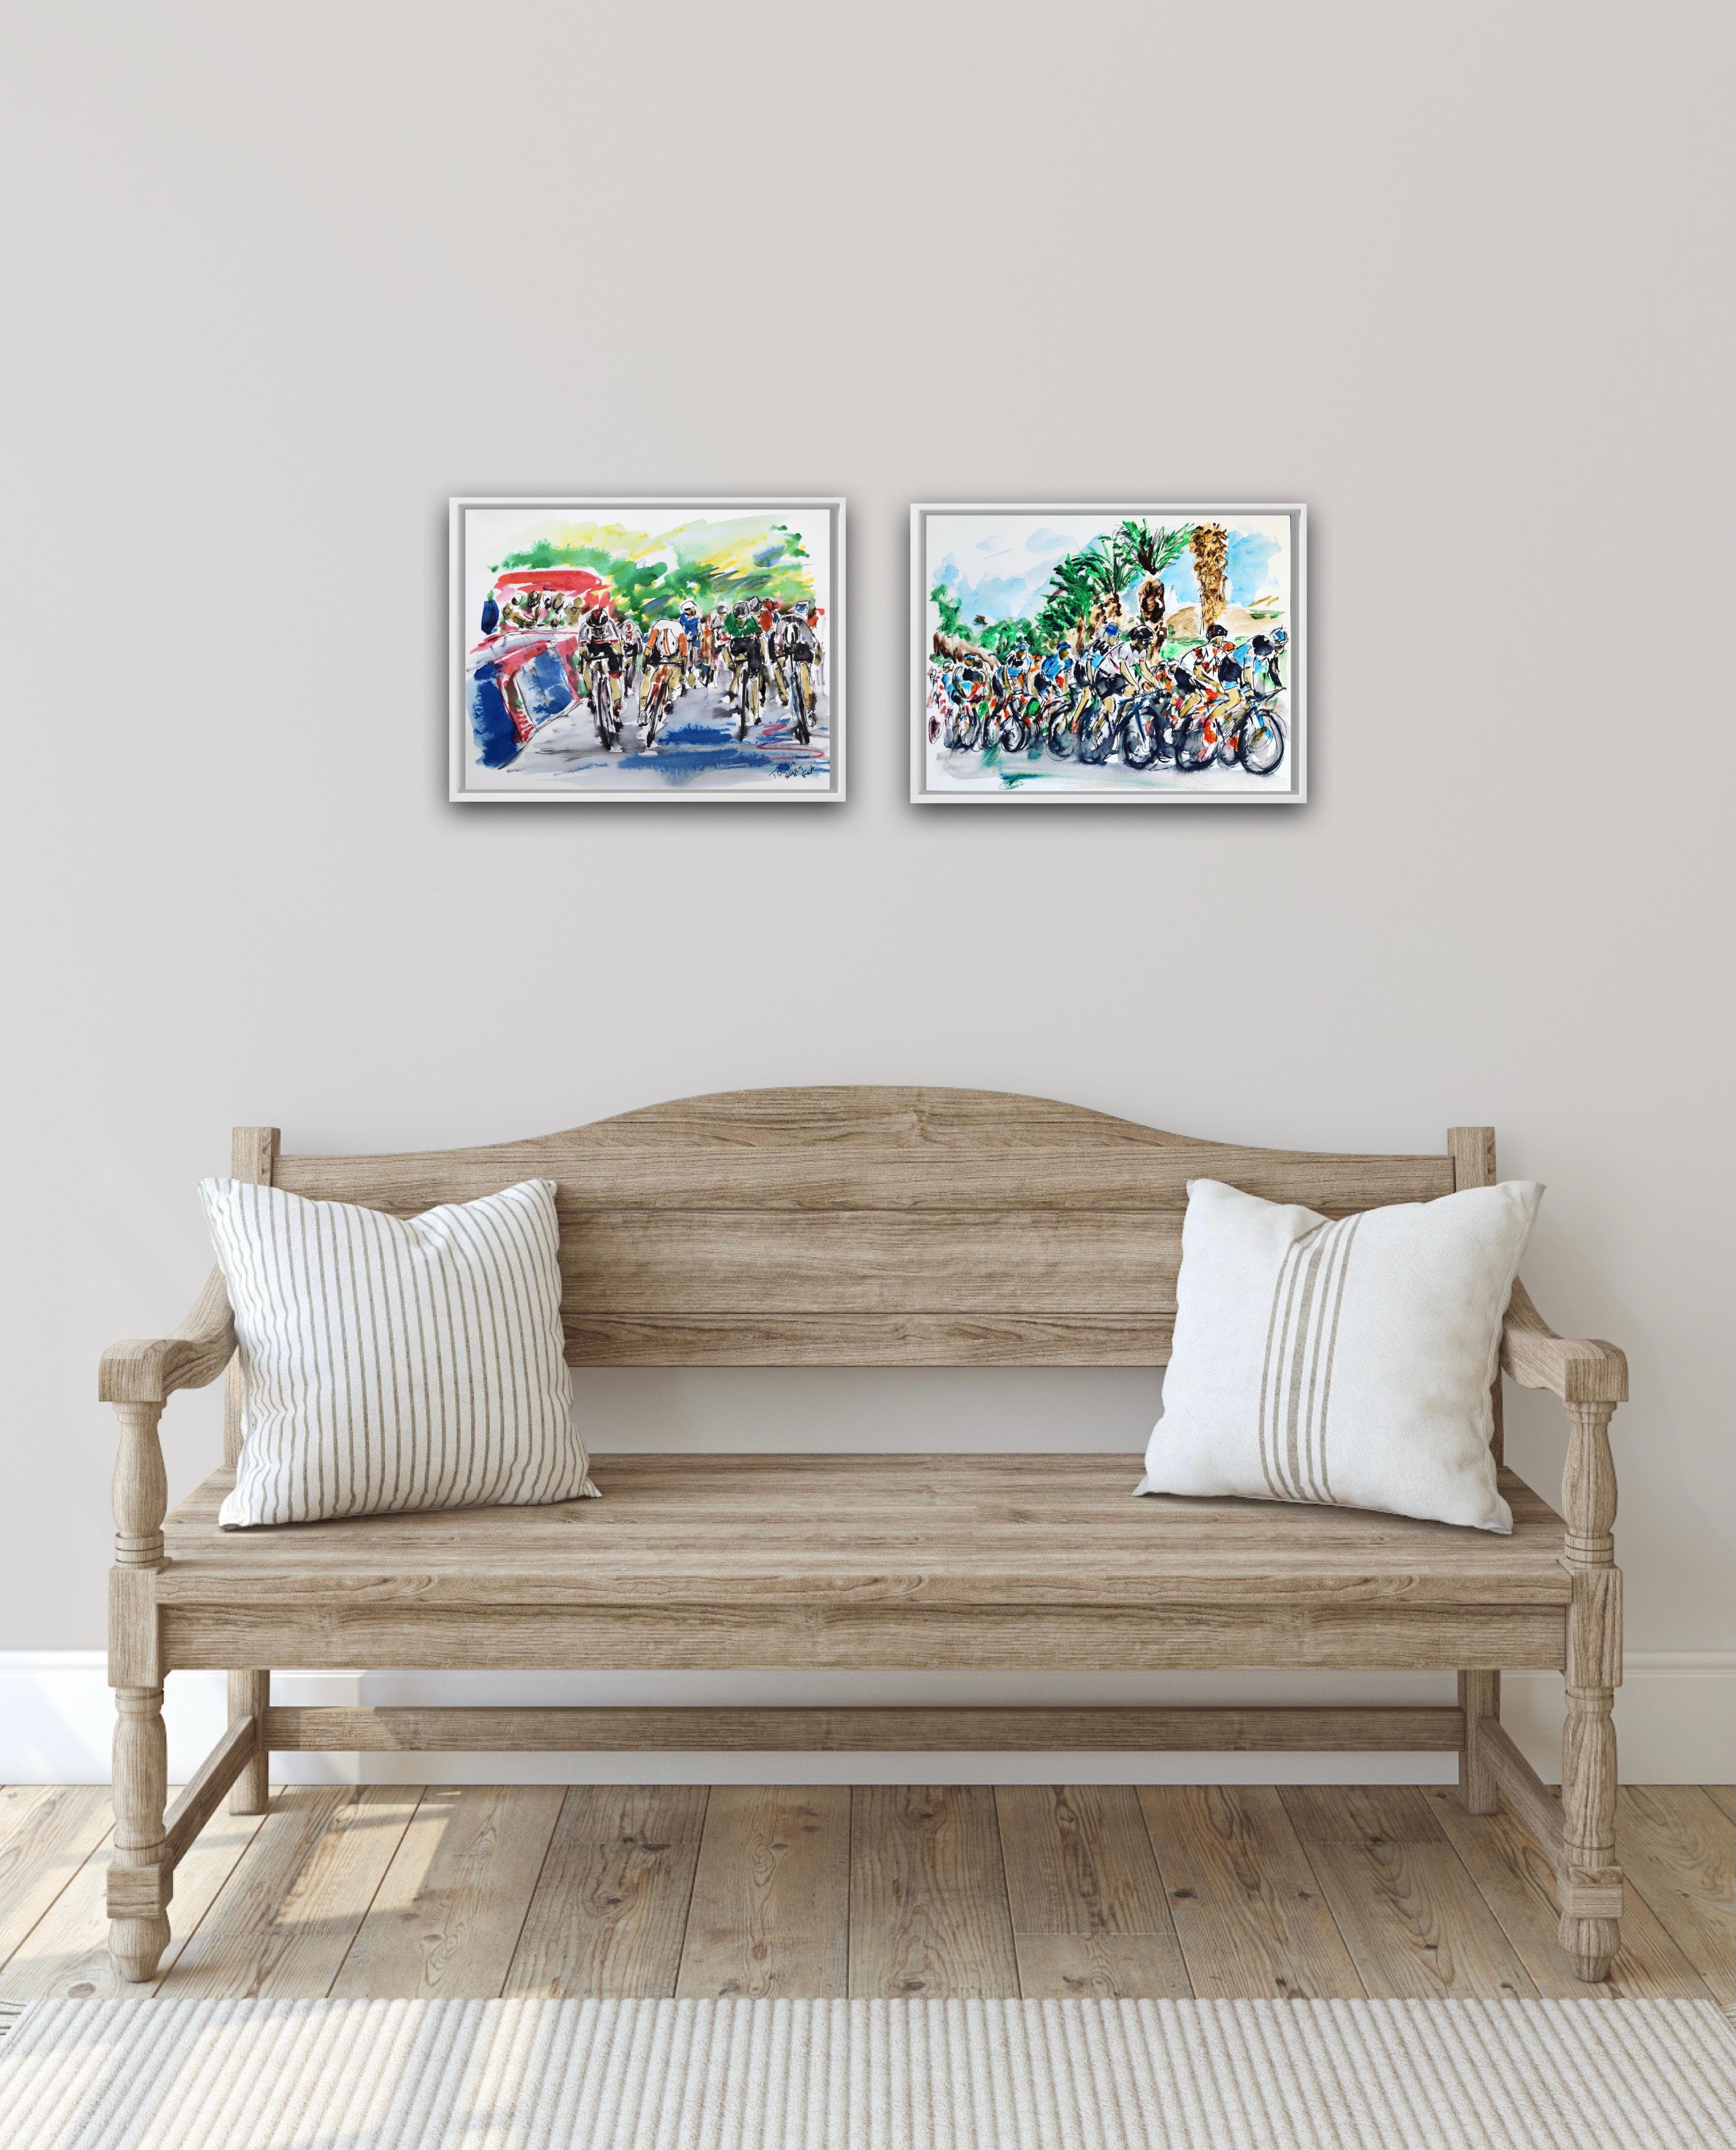 Stage 5 Tour Down Under and Day two of the Tour Down Under ’19 diptych - Gray Abstract Painting by Garth Bayley